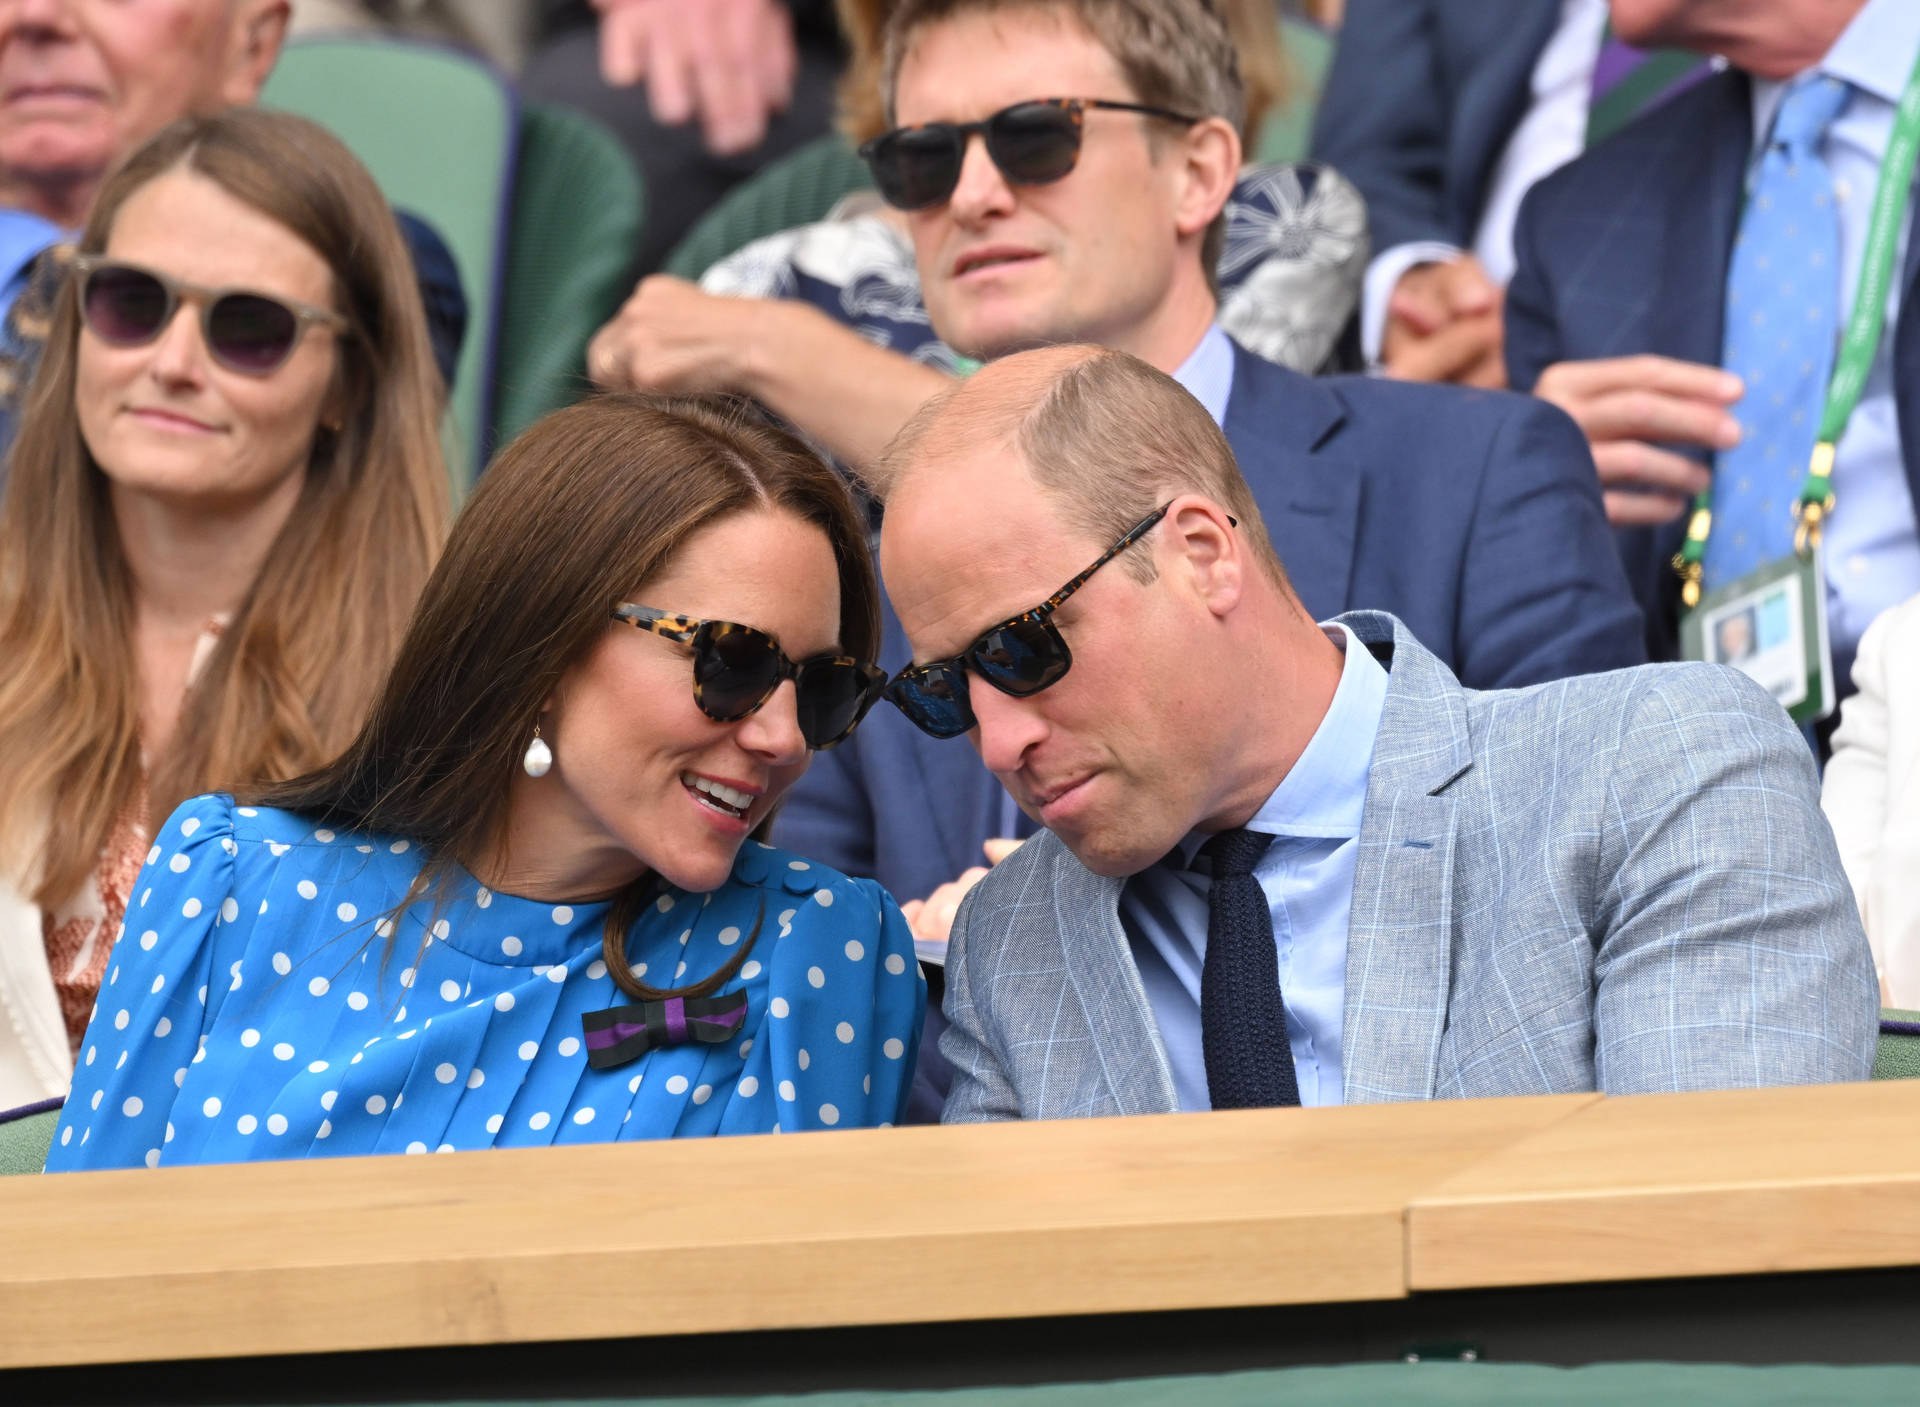 Prince William And Kate Middleton Enjoy A Sunny Day With Sunglasses On. Background